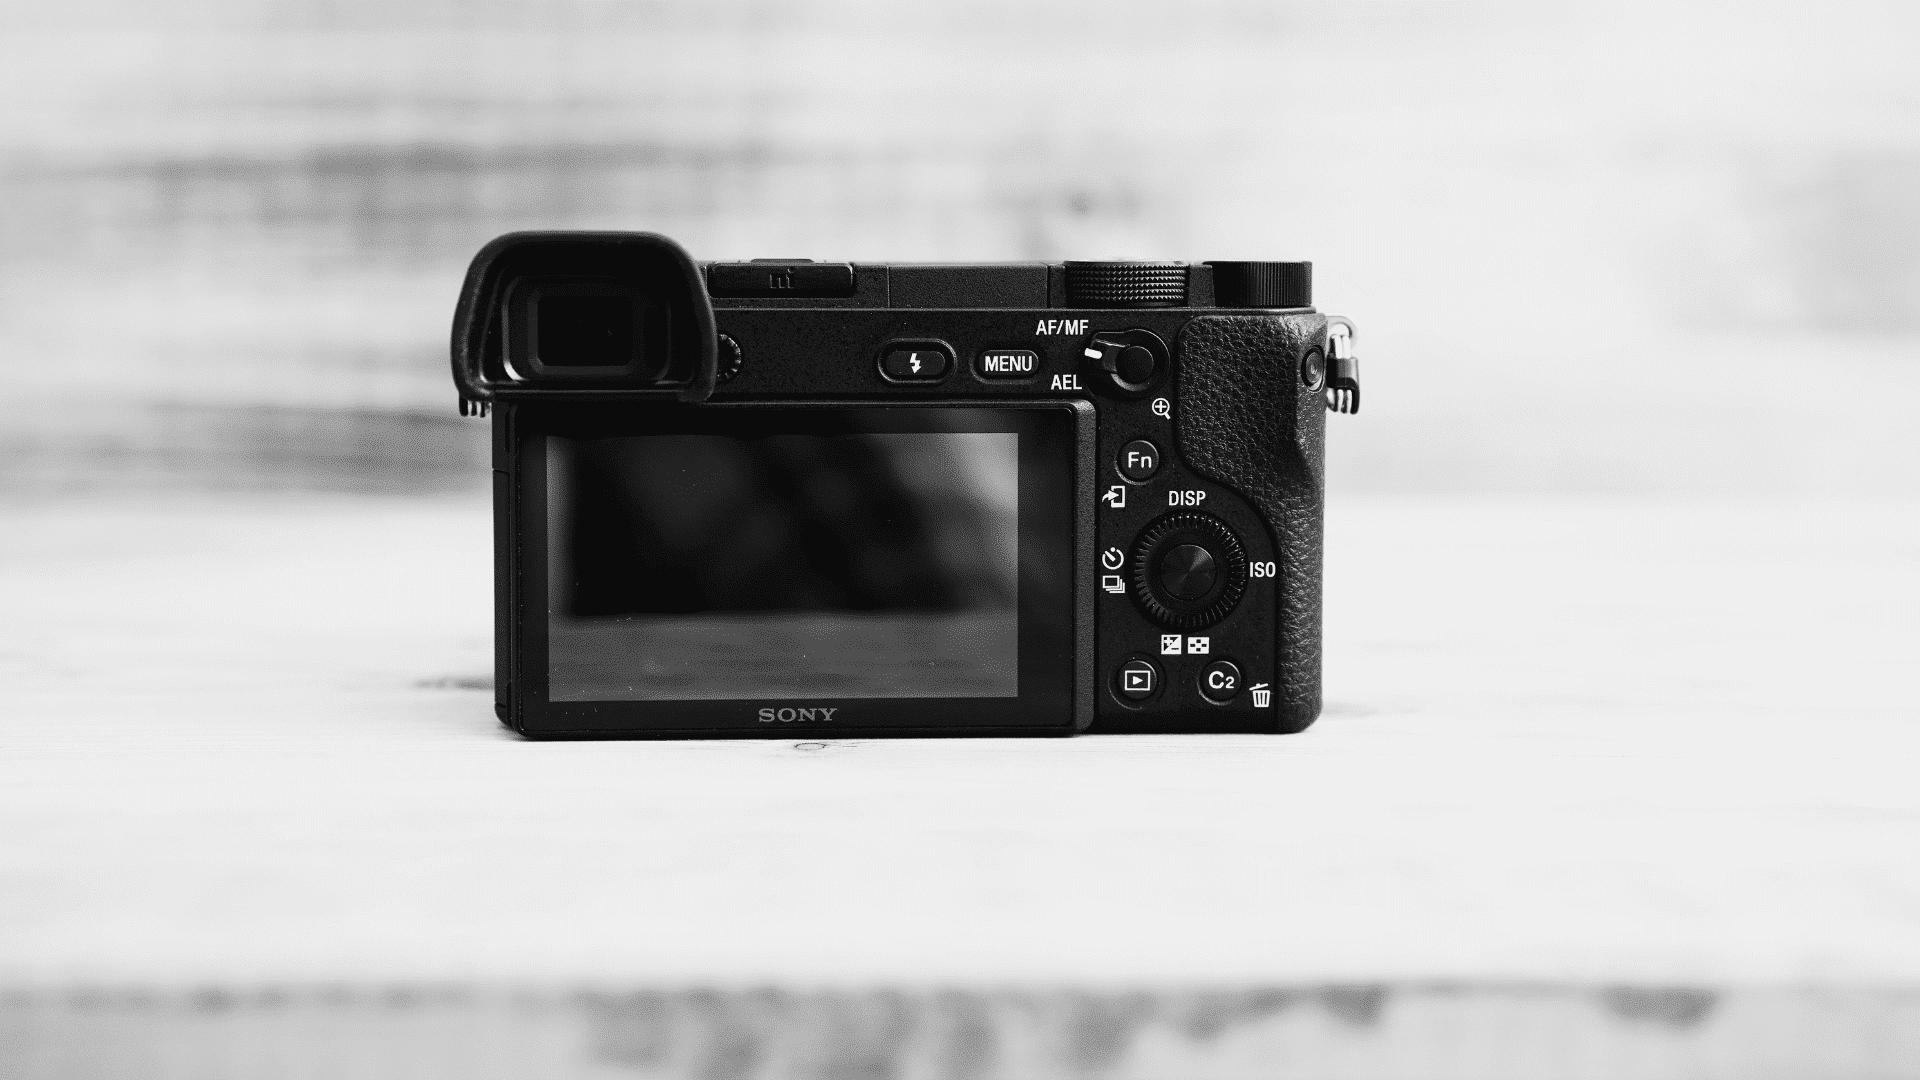 A compact mirrorless camera with a LCD screen. - The image sensor is responsible for capturing light and translating it into digital data, which is then sent to the camera’s electronic viewfinder or LCD screen.